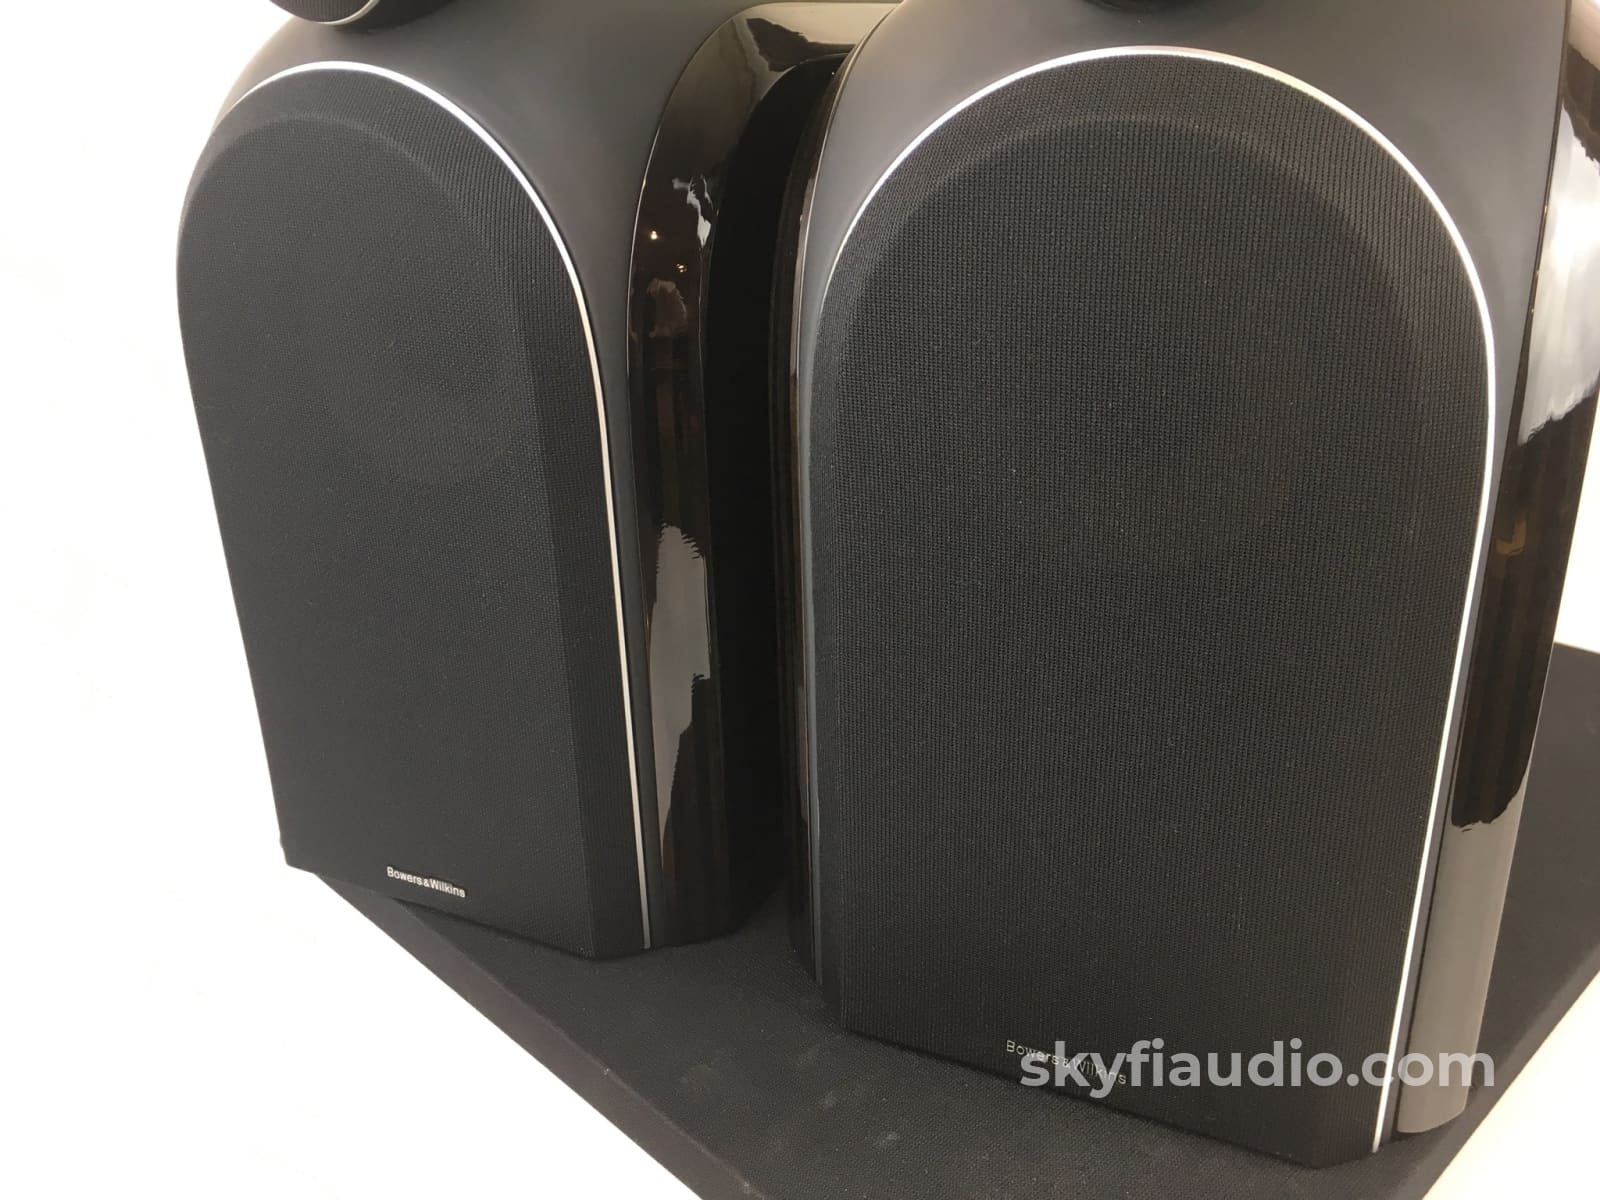 B&W (Bowers & Wilkins) Pm1 Speakers With Matching Stands And Original Box